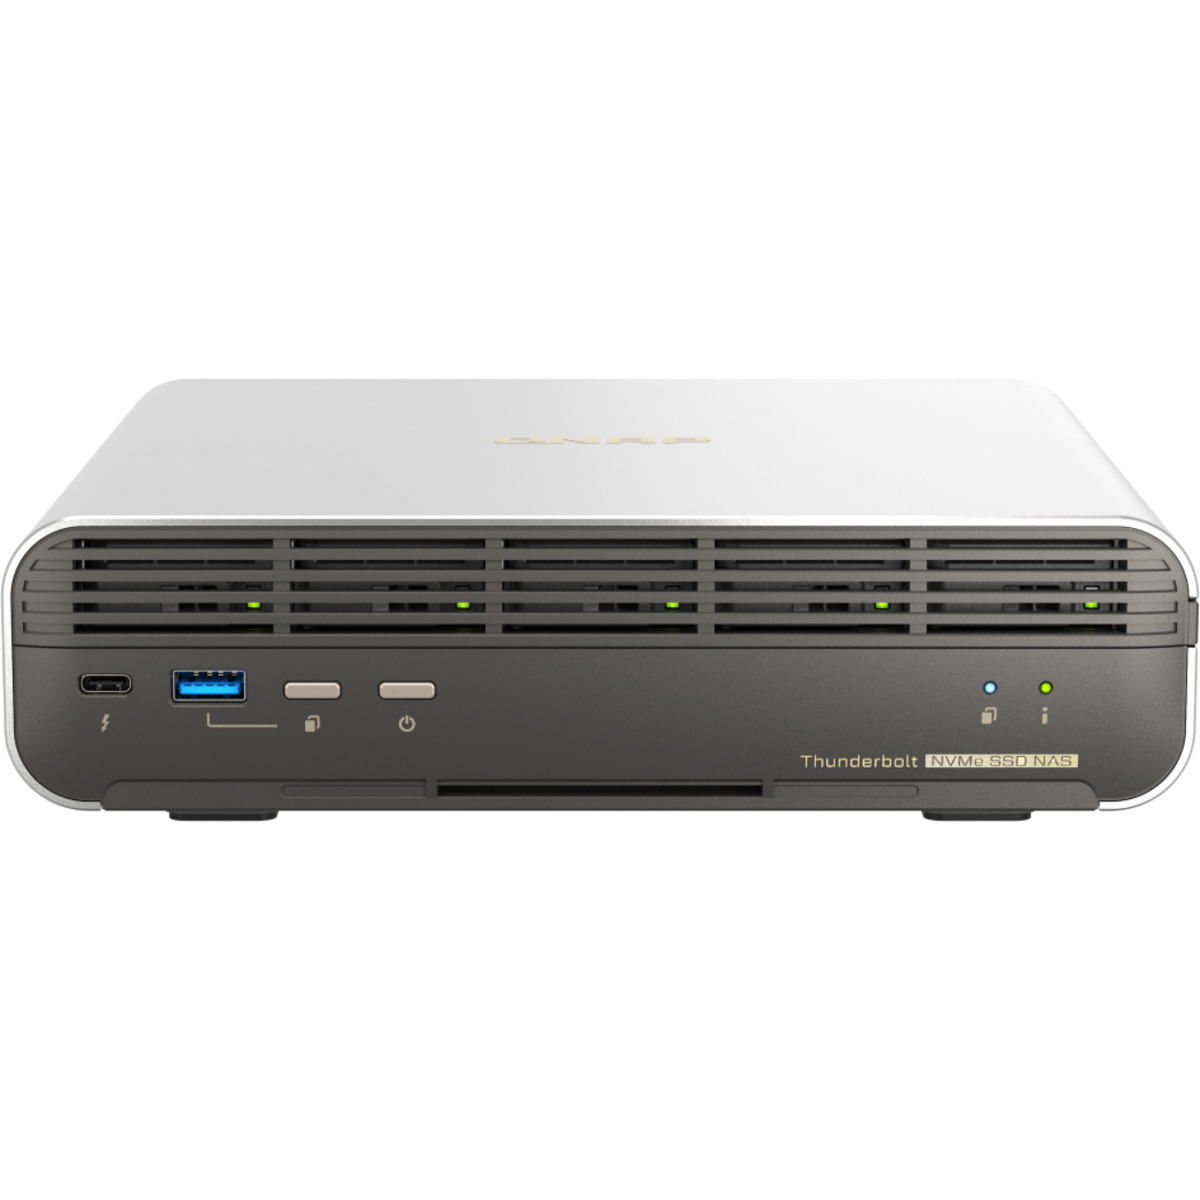 QNAP TBS-h574TX Core i5 Thunderbolt 4 5tb 5-Bay Desktop Multimedia / Power User / Business DAS-NAS - Combo Direct + Network Storage Device 5x1tb Samsung 990 EVO MZ-V9E1T0BW  5000/4200MB/s M.2 2280 NVMe SSD CONSUMER Class Drives Installed - Burn-In Tested TBS-h574TX Core i5 Thunderbolt 4